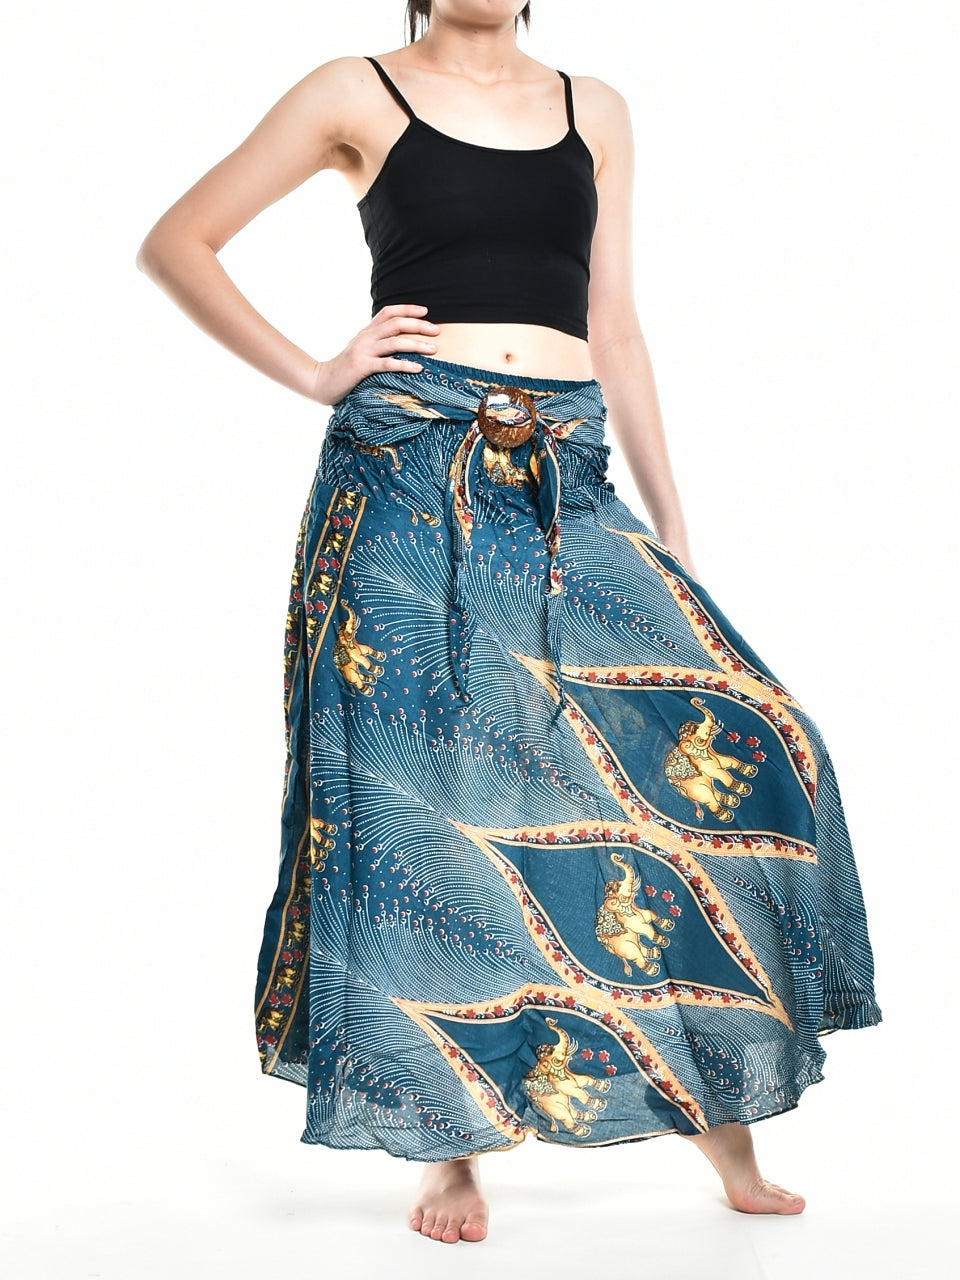 Bohotusk Teal Green Elephant Diamond Long Skirt With Coconut Buckle (& Strapless Dress) S/M Only